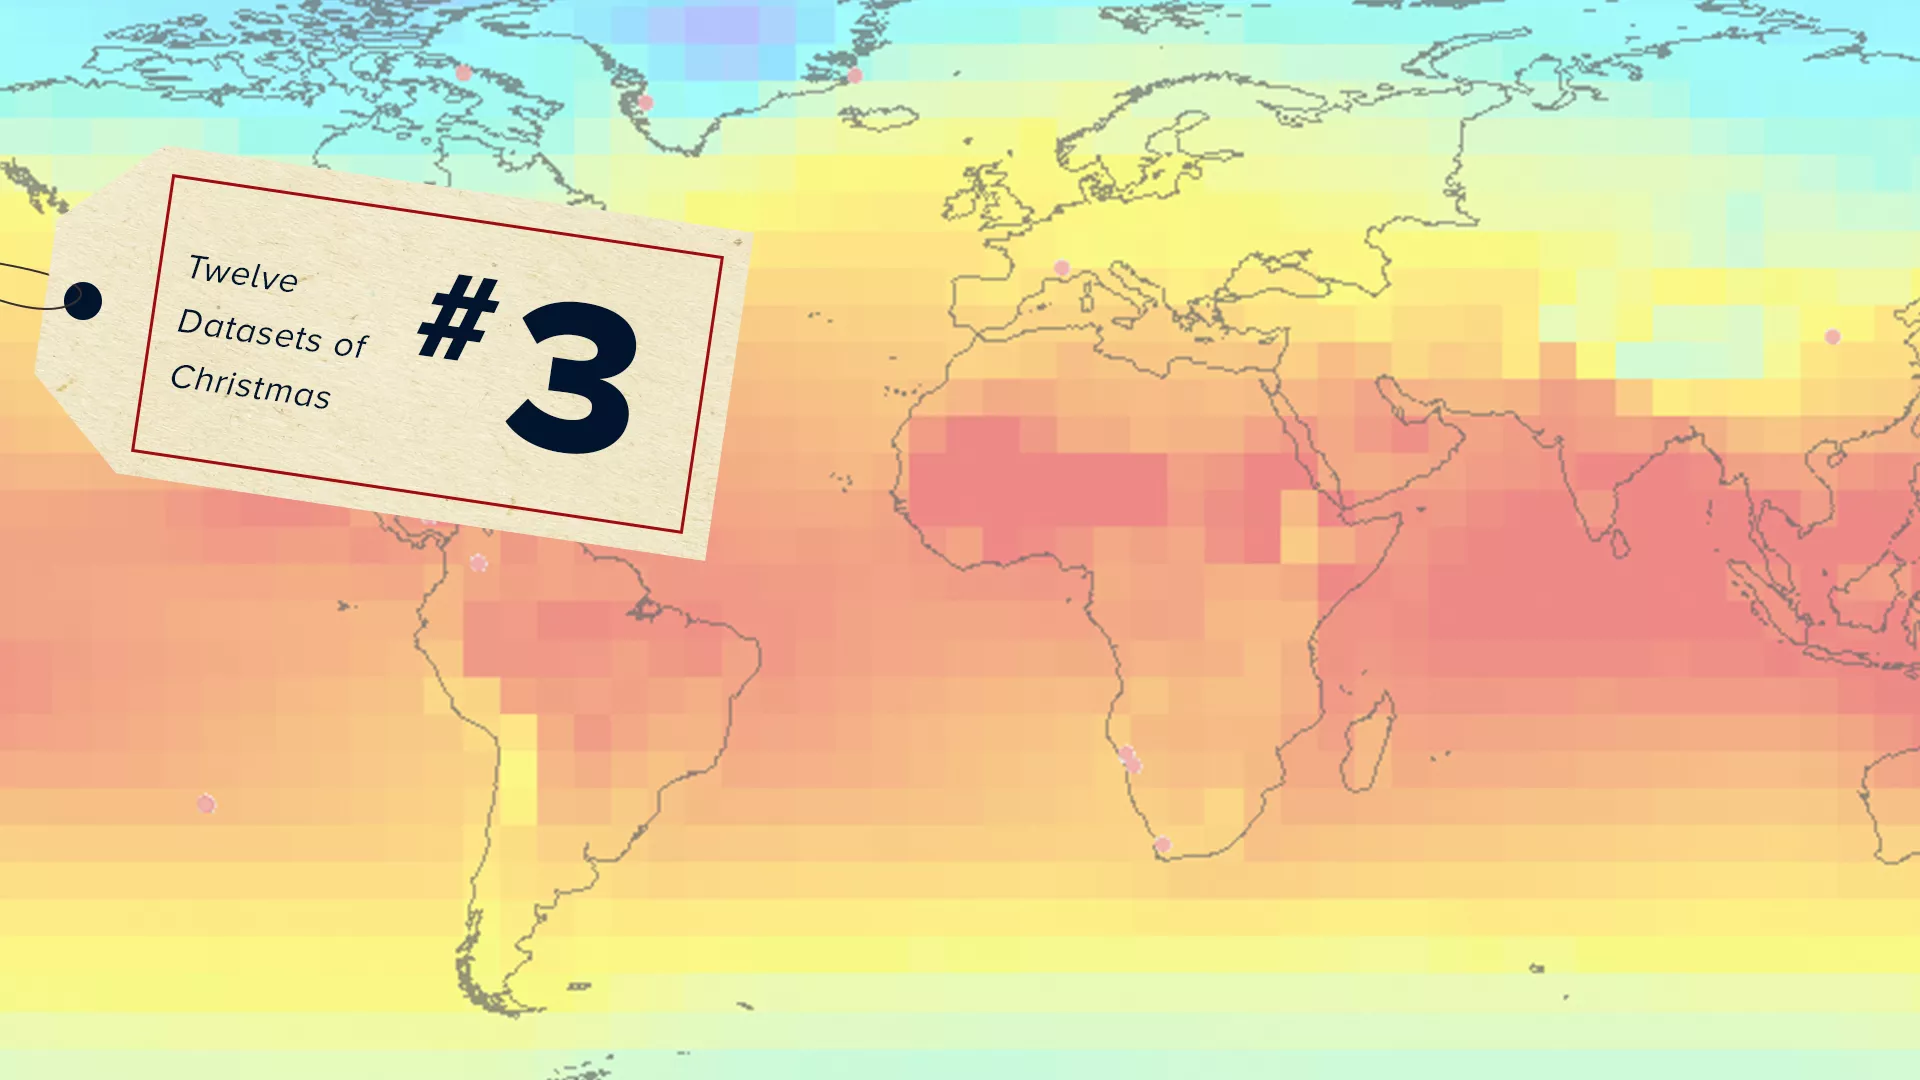 Rectangular projection of Earth, showing paleoclimatic data, with a #3 sticker for the 12 datasets of Christmas on top. 